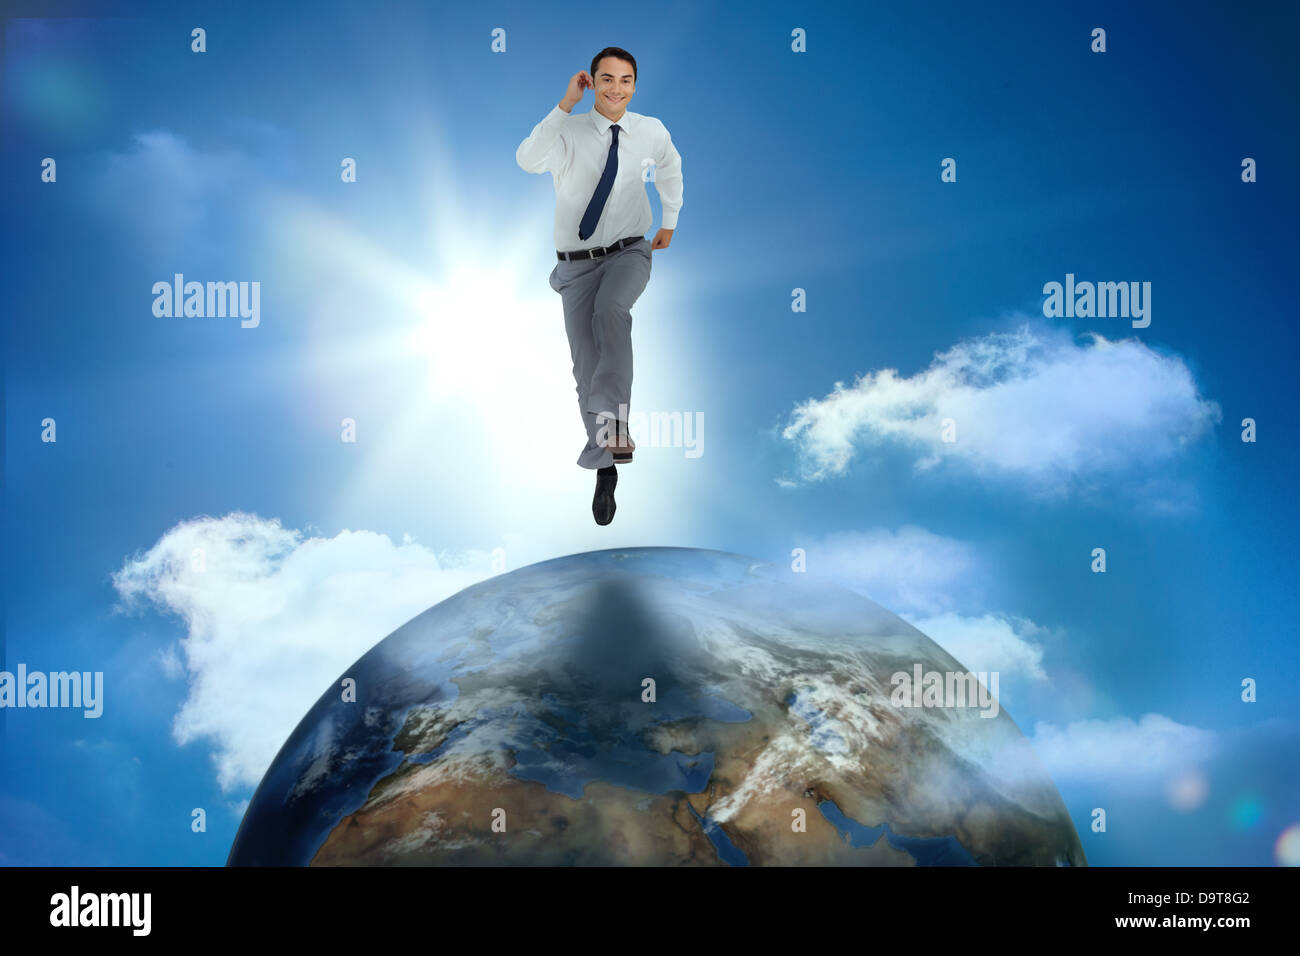 Businessman racing on top of the world Stock Photo